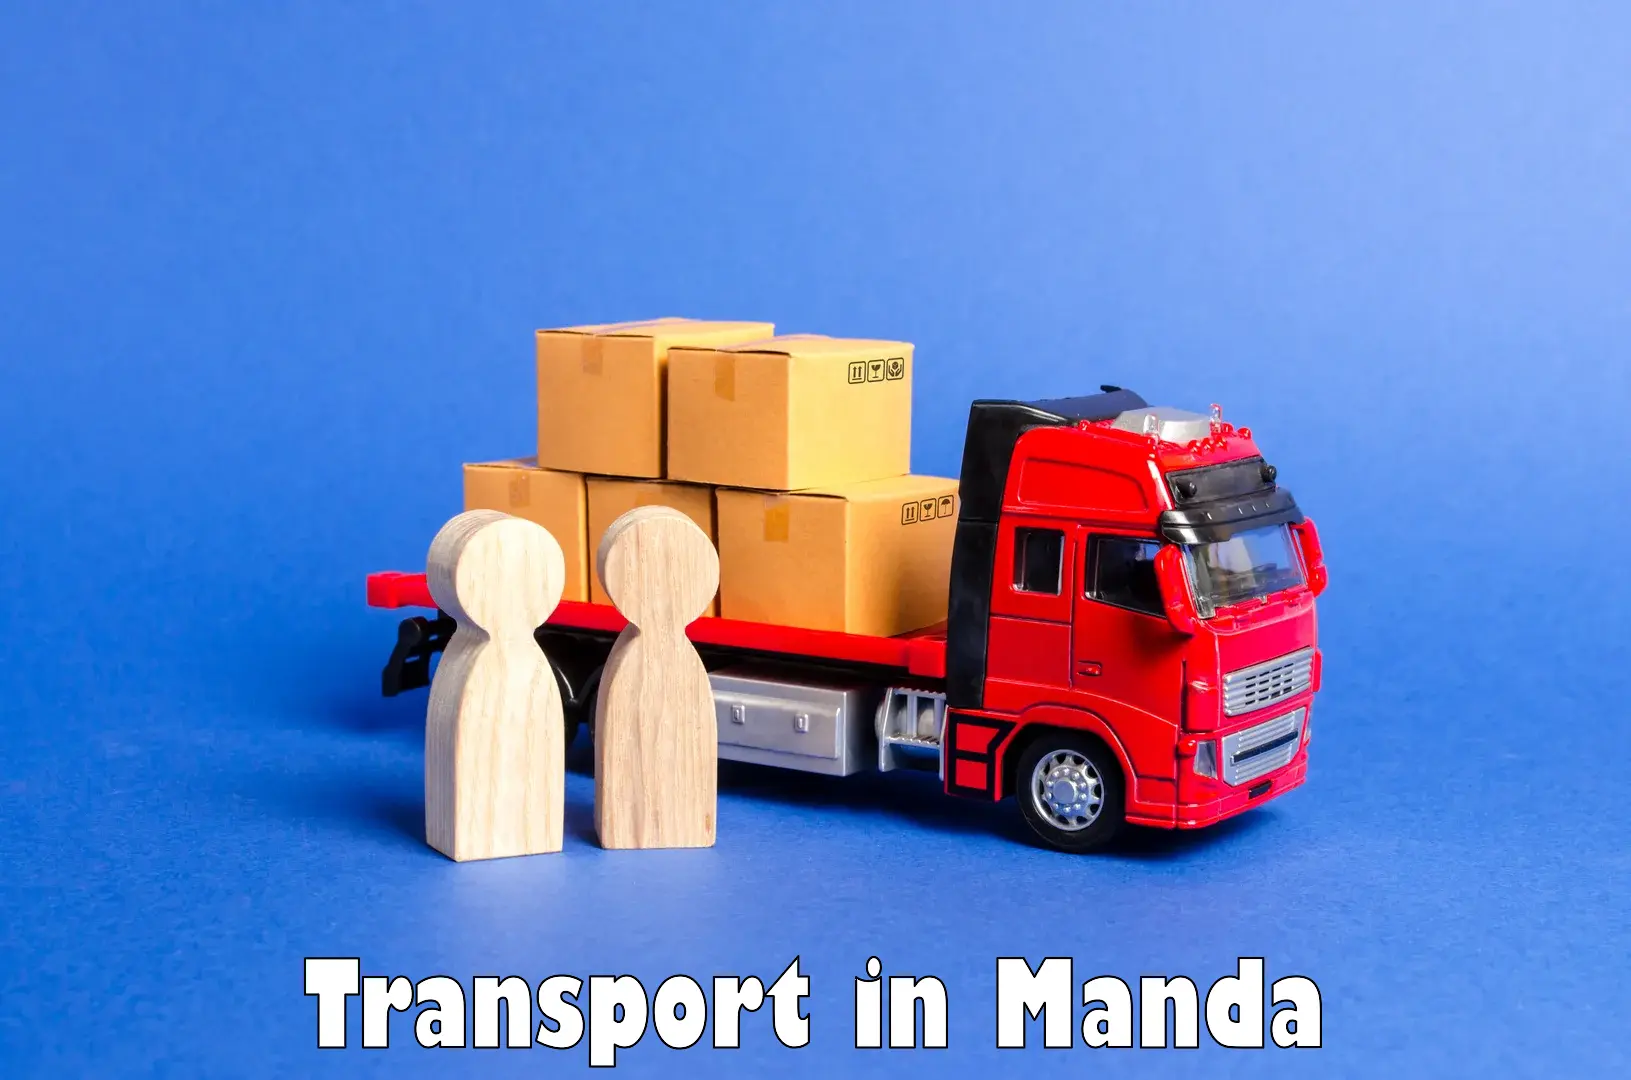 Nationwide transport services in Manda